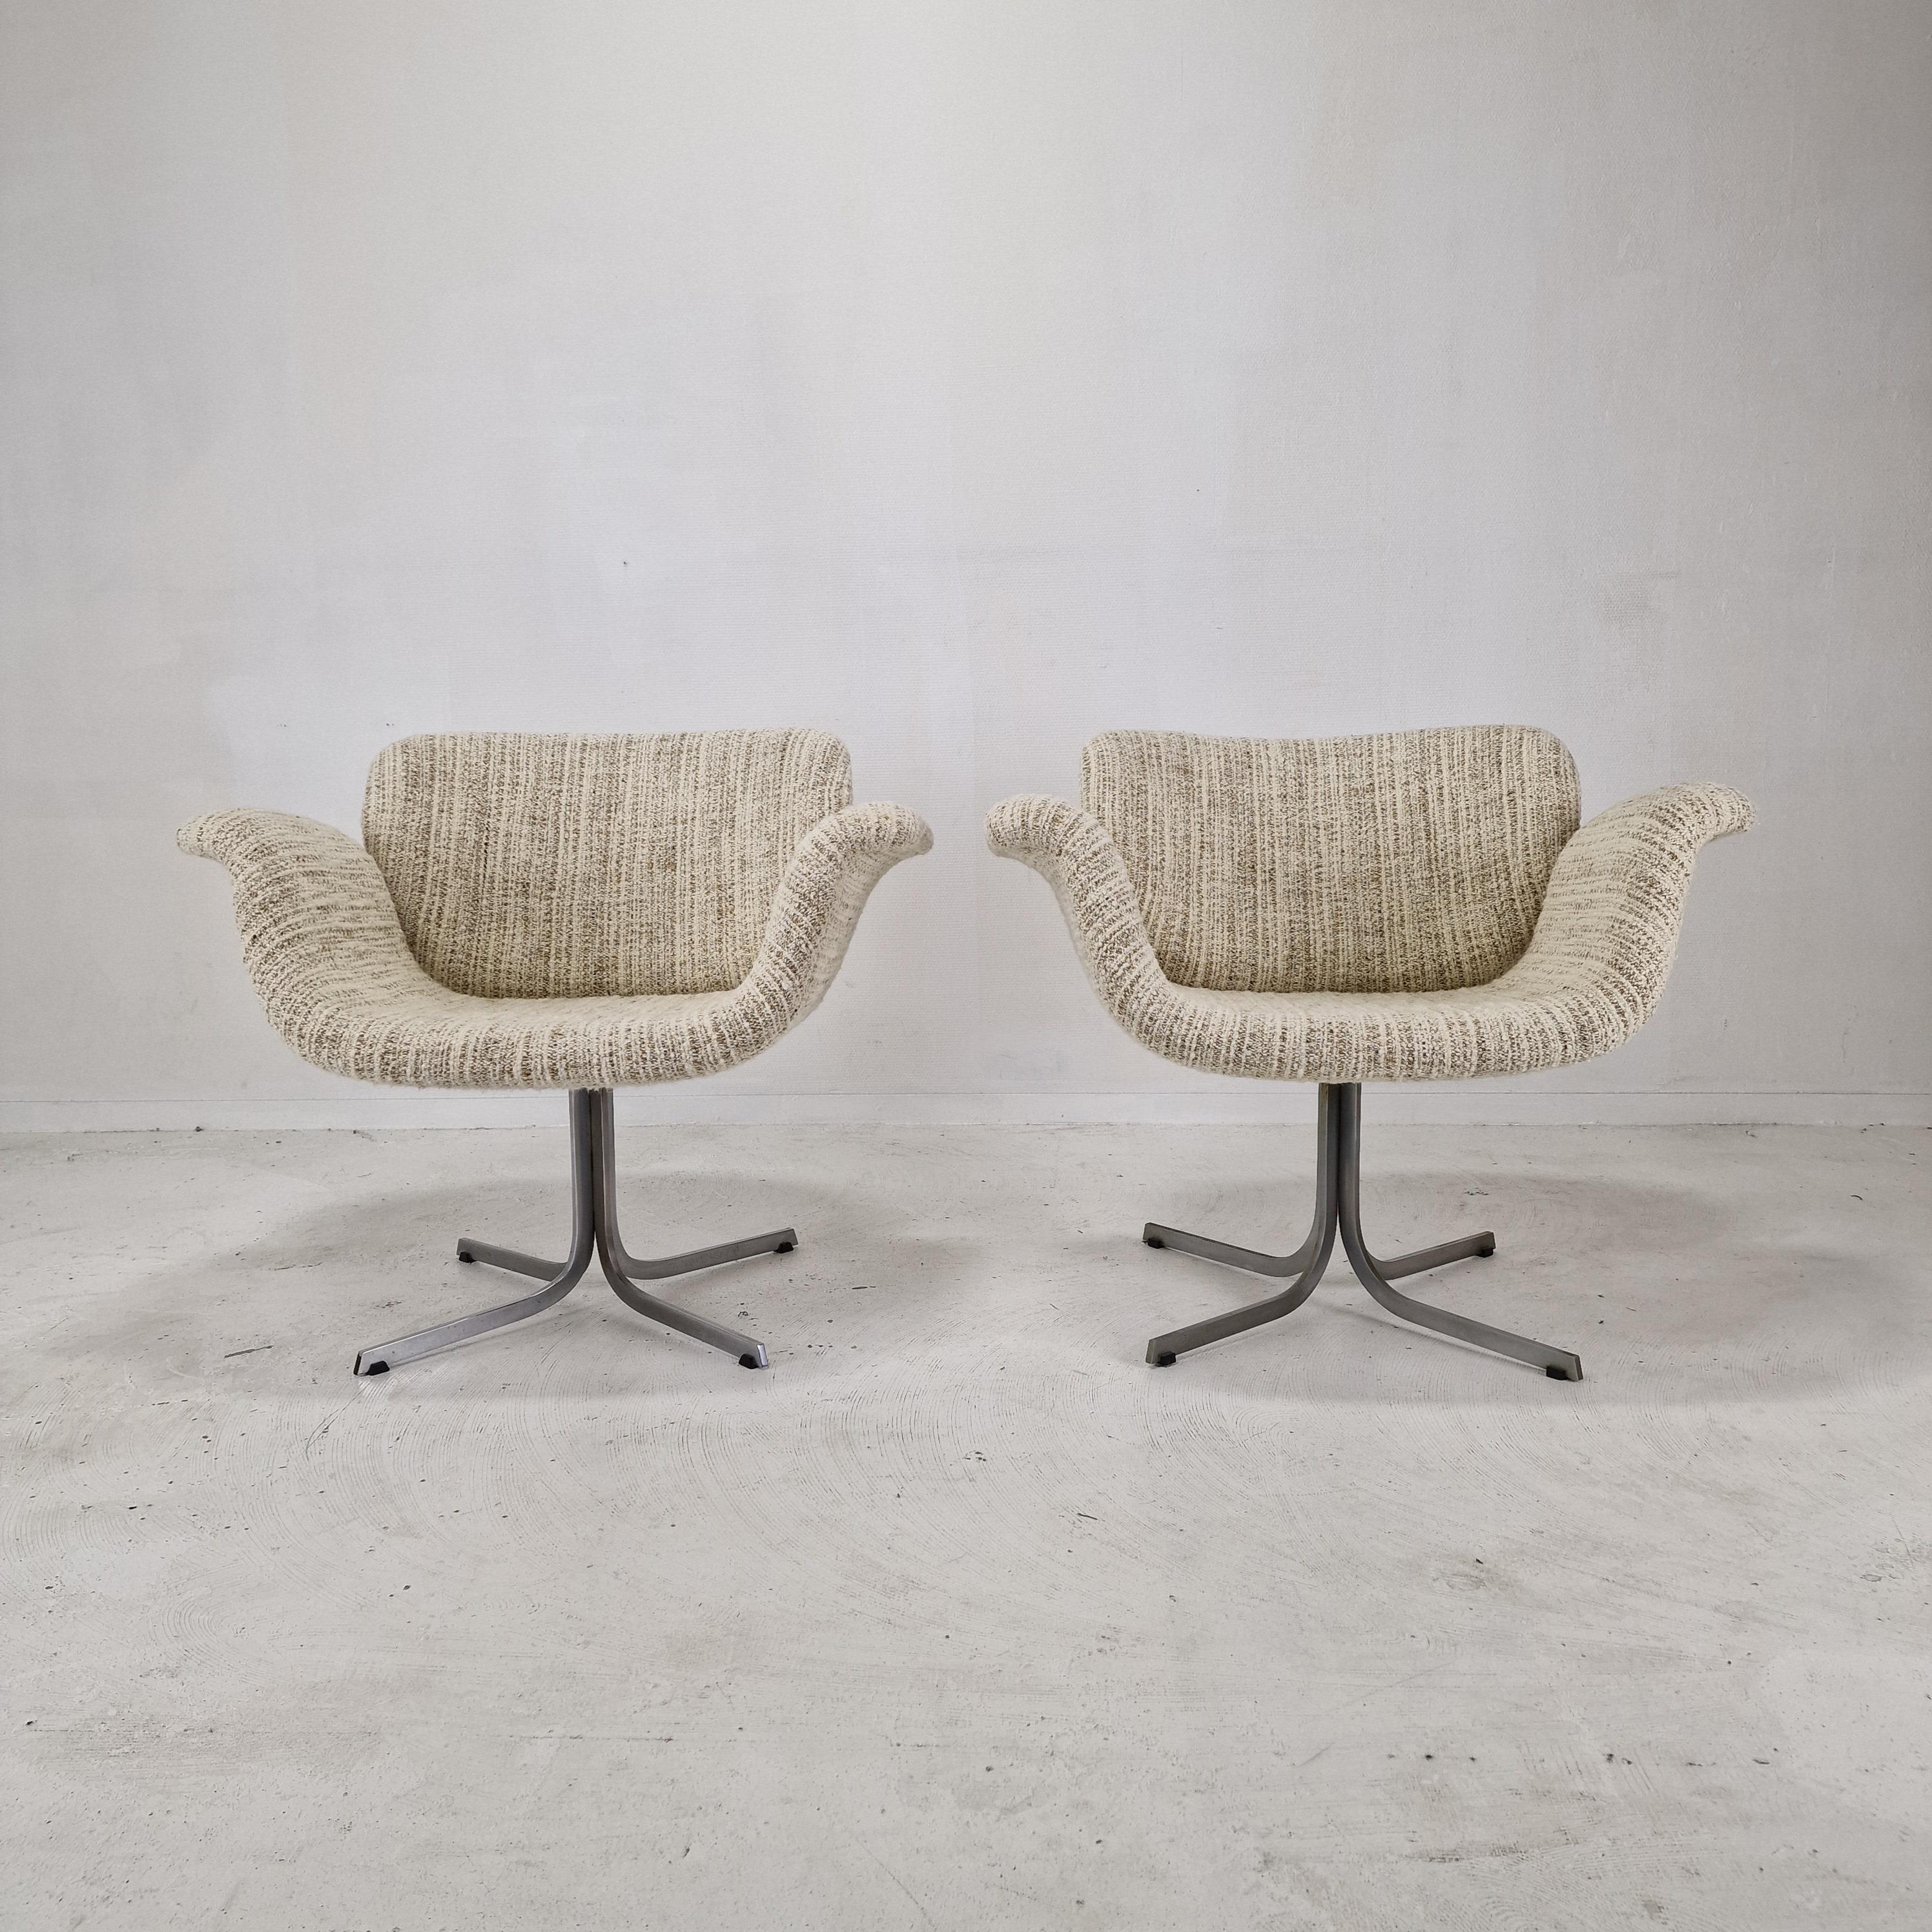 A set with 2 very comfortable and original Big Tulip lounge chairs.
These chairs are designed by Pierre Paulin for Artifort in 1965. 

This low version without head rest is a rare edition.

Both chairs are just reupholstered with stunning wool